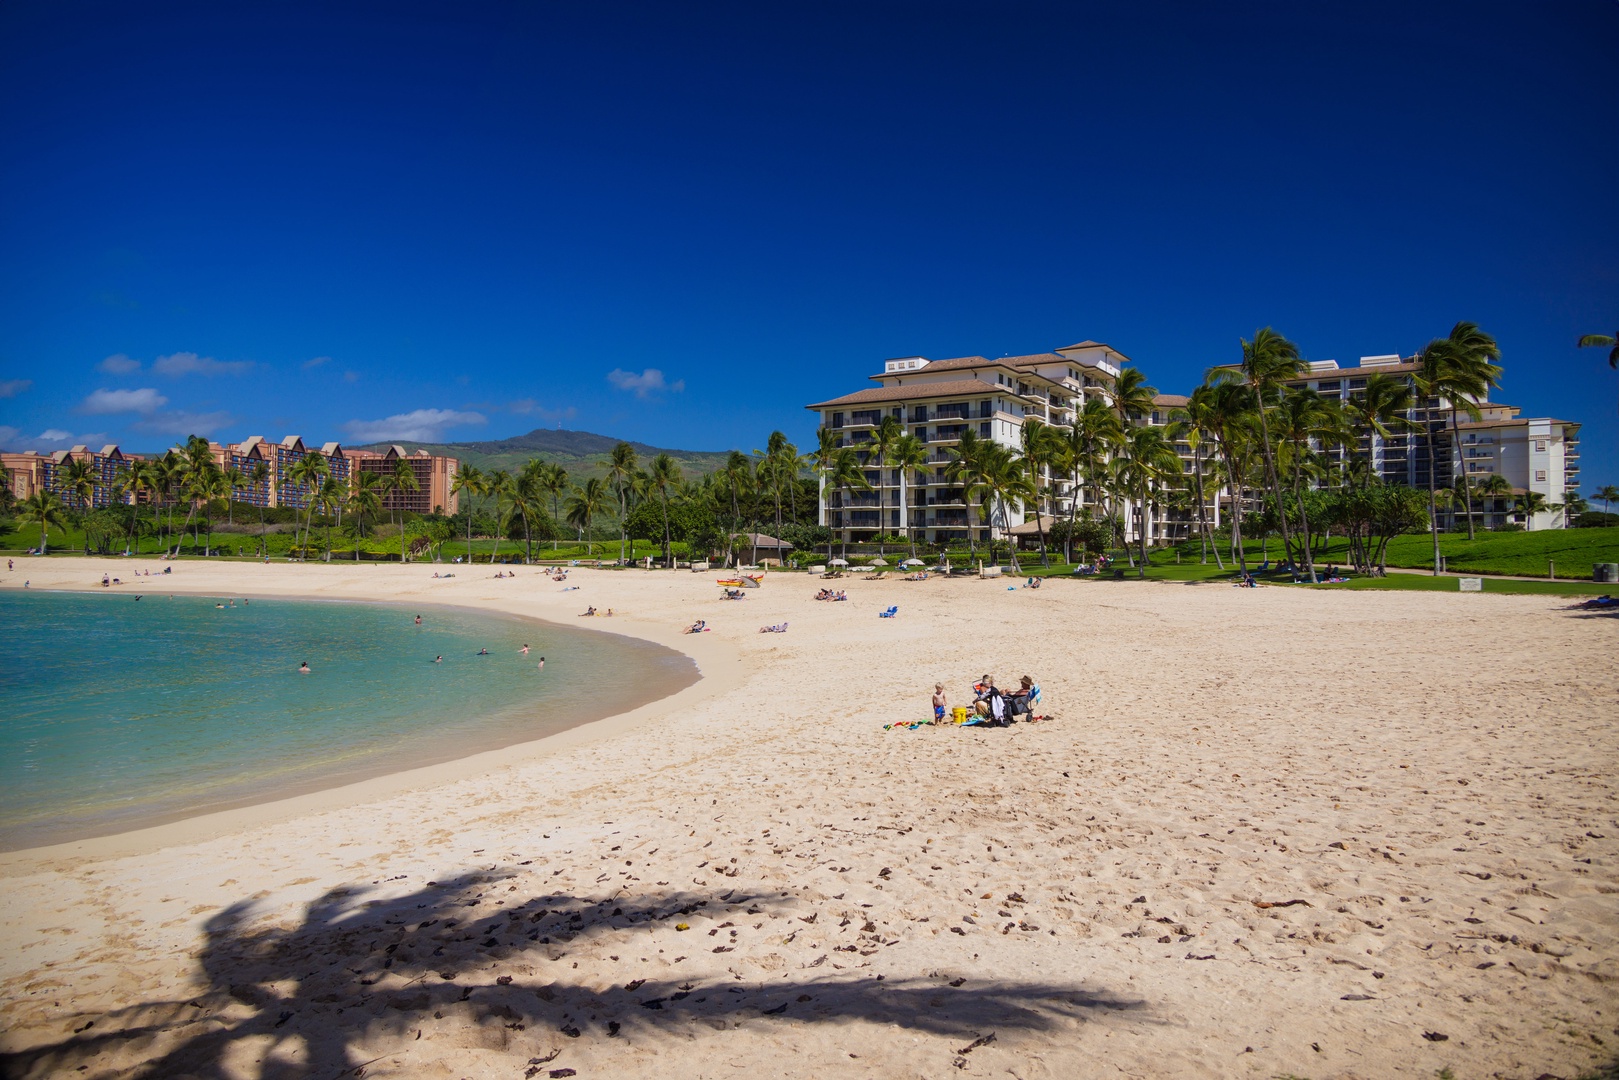 Kapolei Vacation Rentals, Ko Olina Kai 1105F - Ko Olina's private lagoons with soft sands and crystal blue water, perfect for afternoon swim or spectacular views